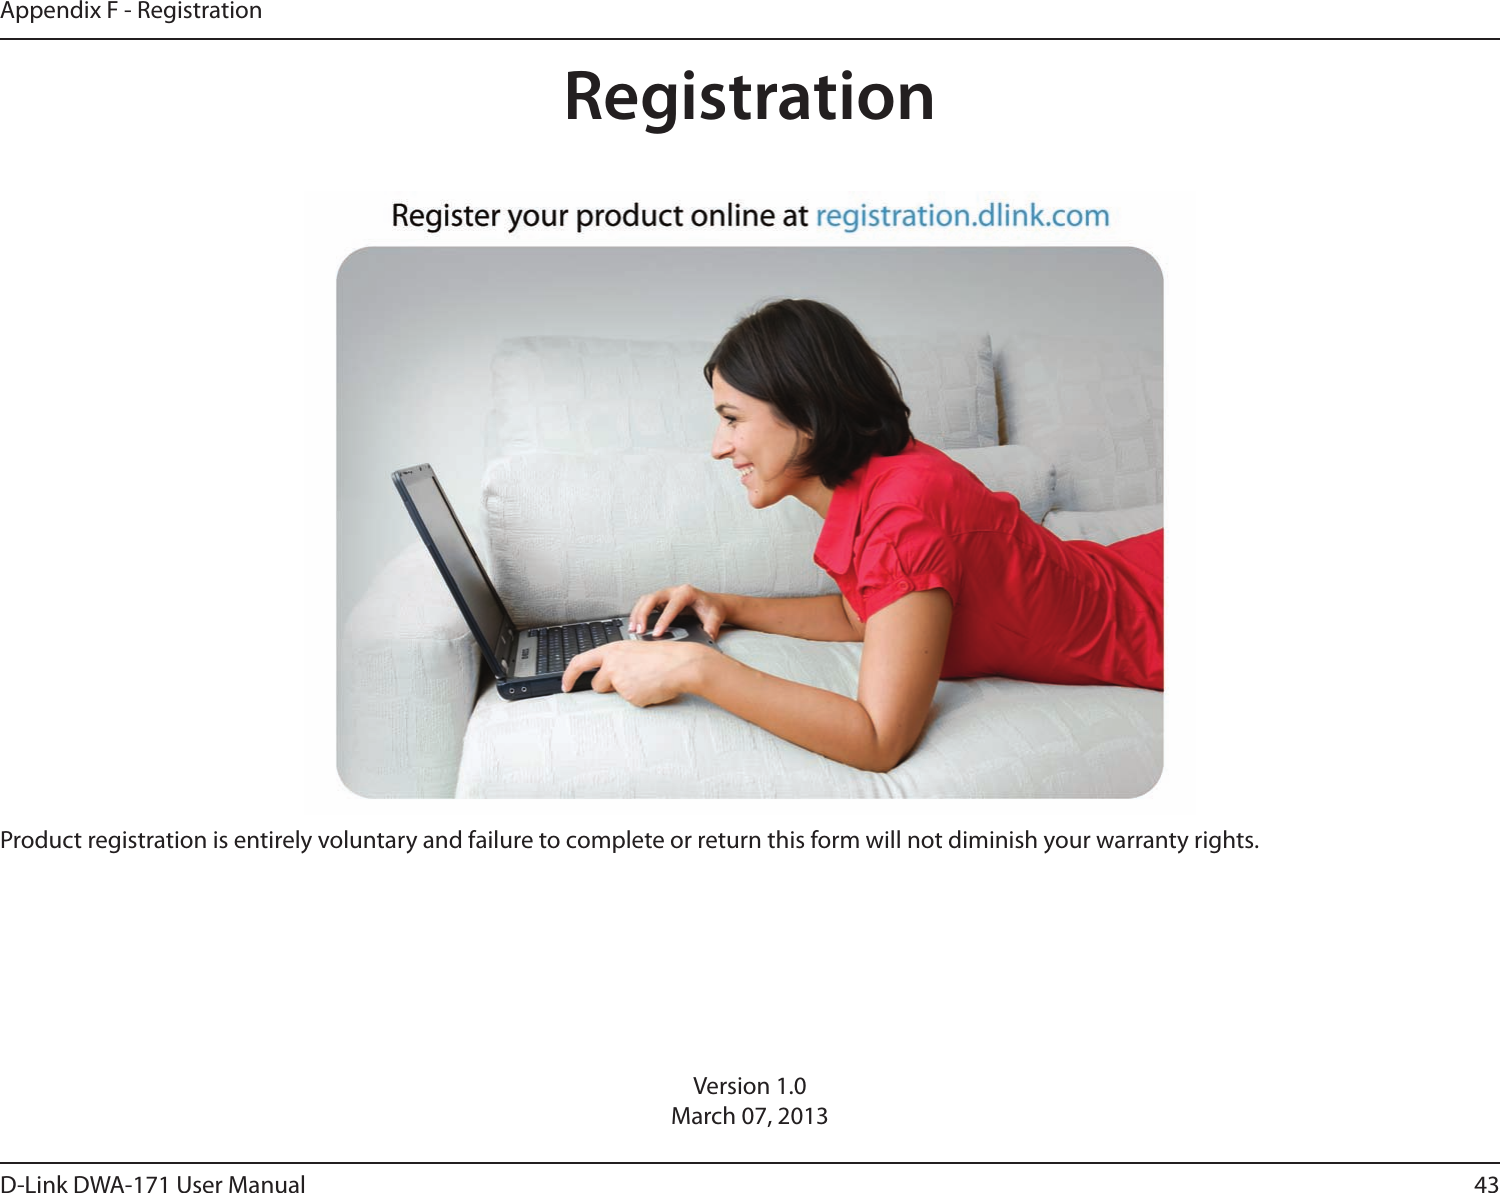 43D-Link DWA-171 User ManualAppendix F - RegistrationVersion 1.0March 07, 2013Product registration is entirely voluntary and failure to complete or return this form will not diminish your warranty rights.Registration